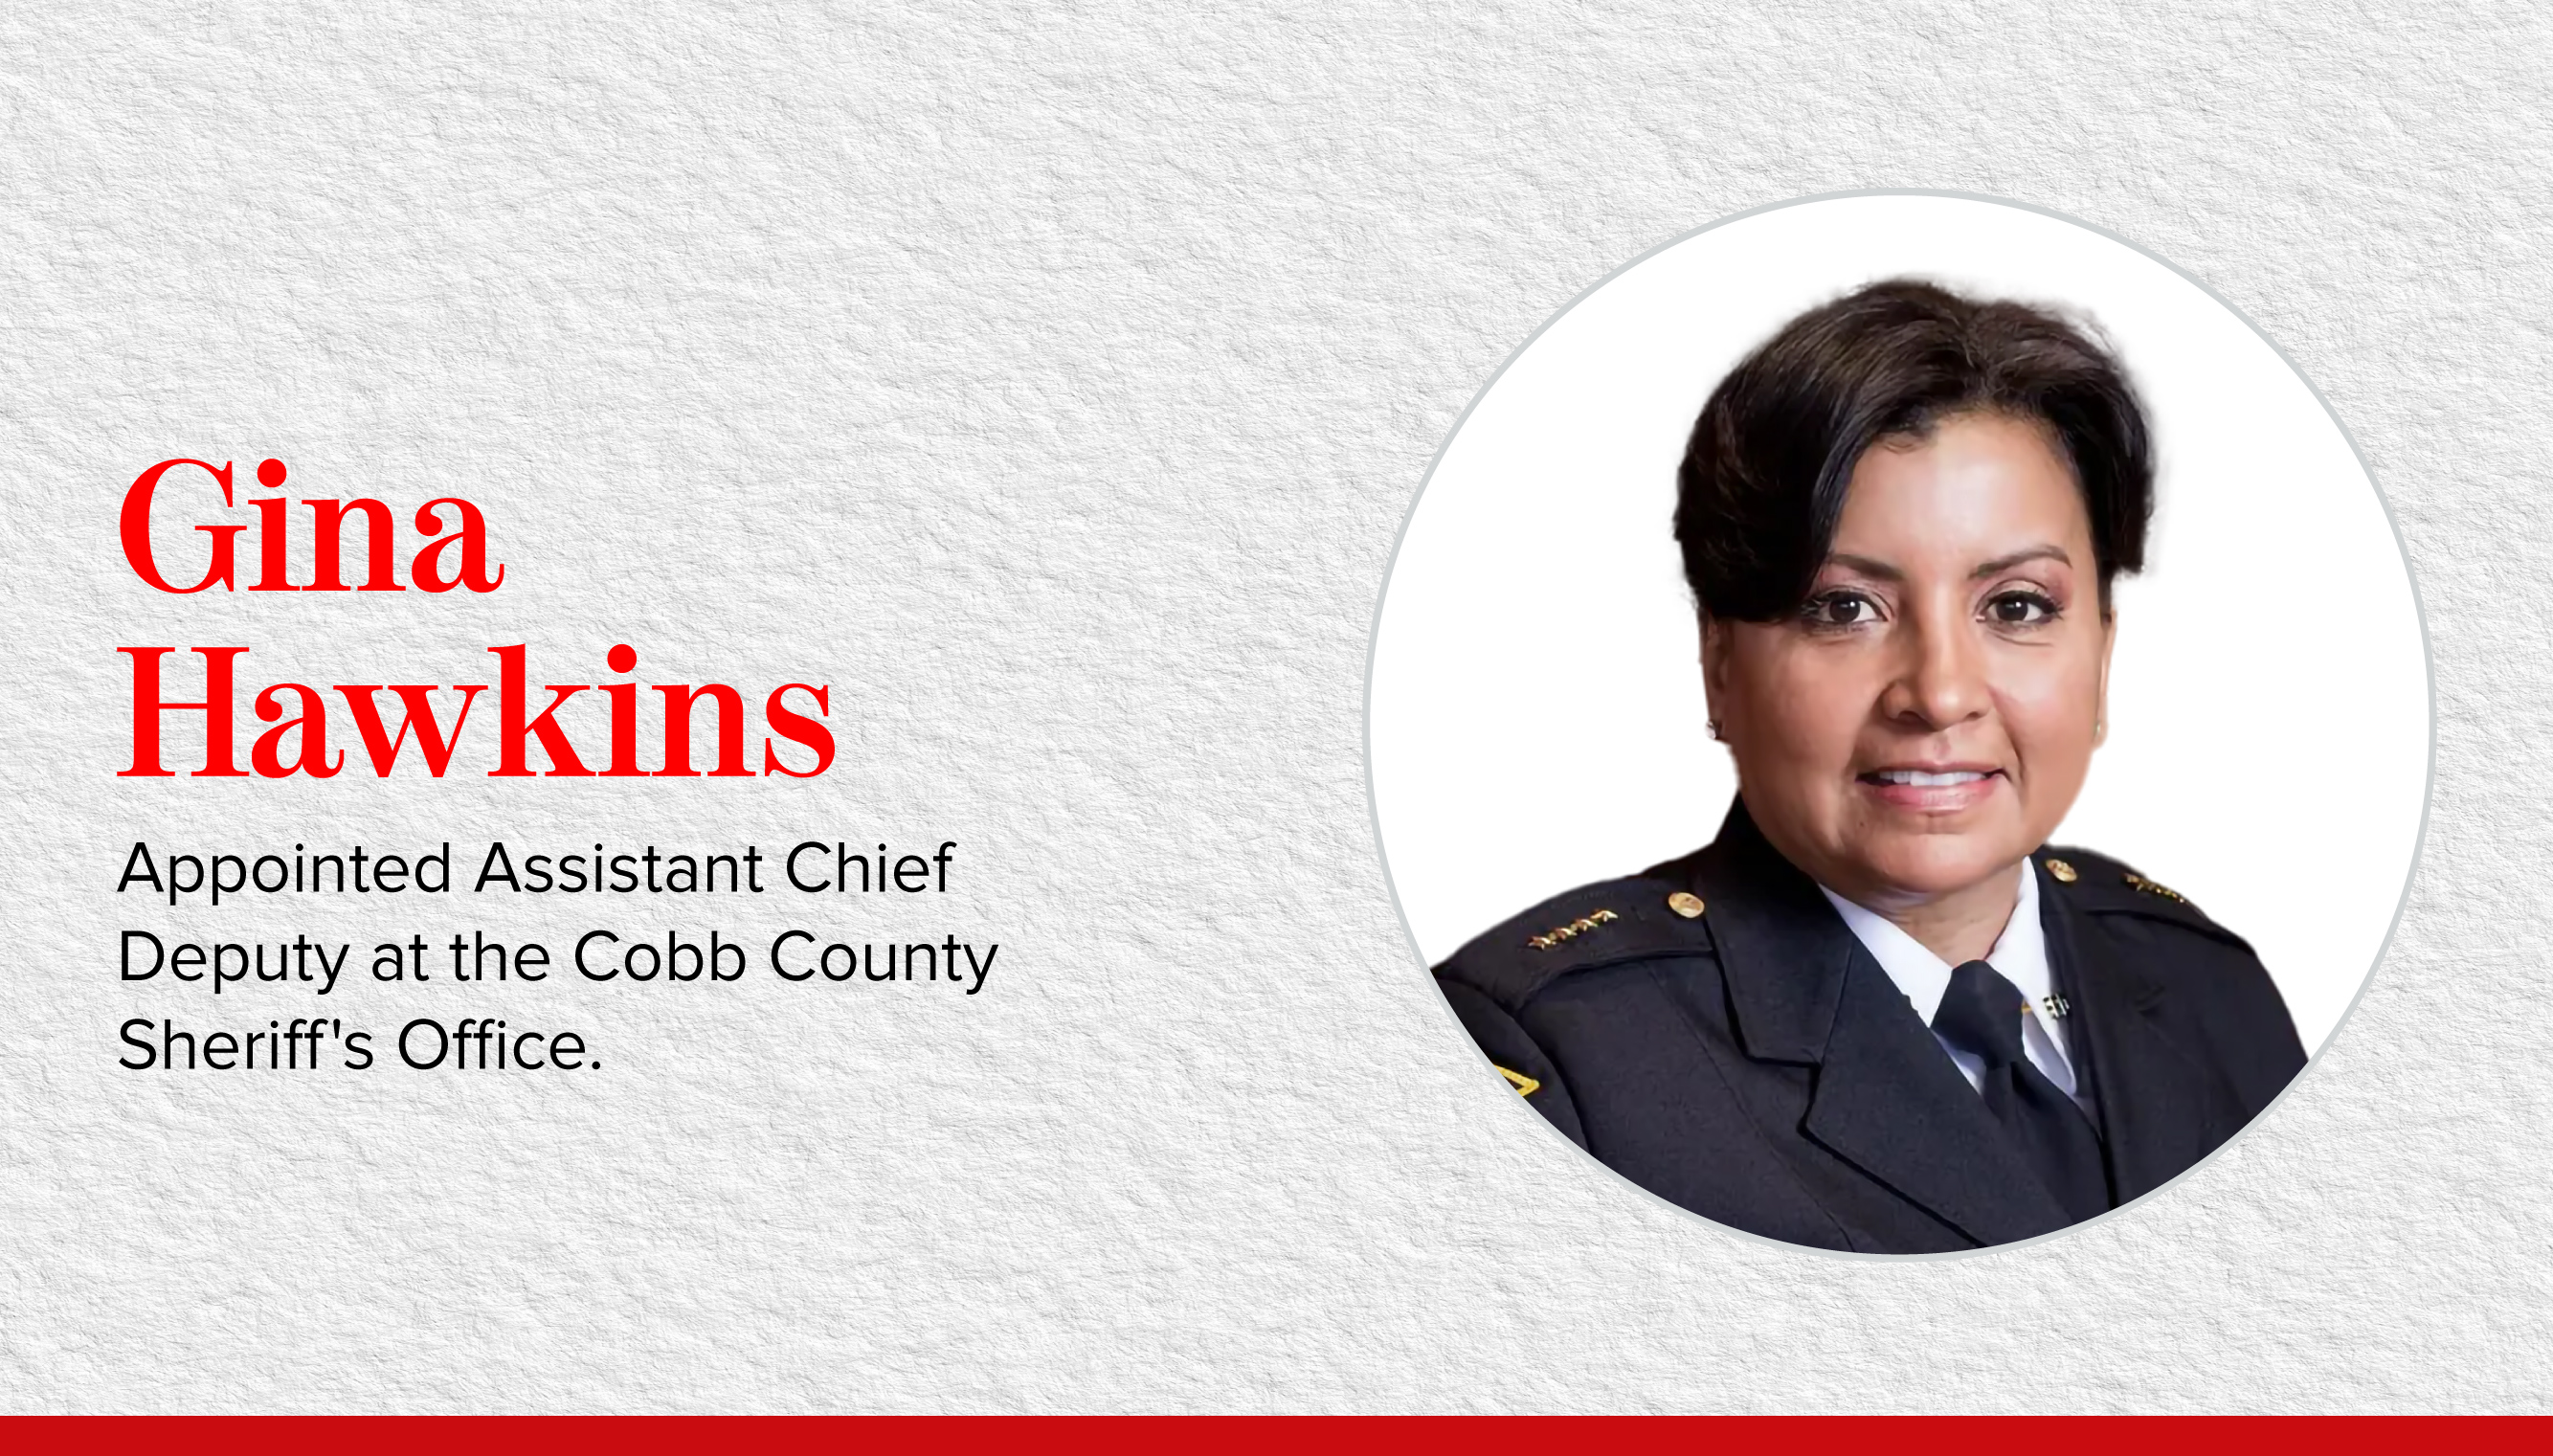 Gina Hawkins is joining the Cobb County Sheriff's Office. Graphic: Mónica Hernández/AL DÍA News.